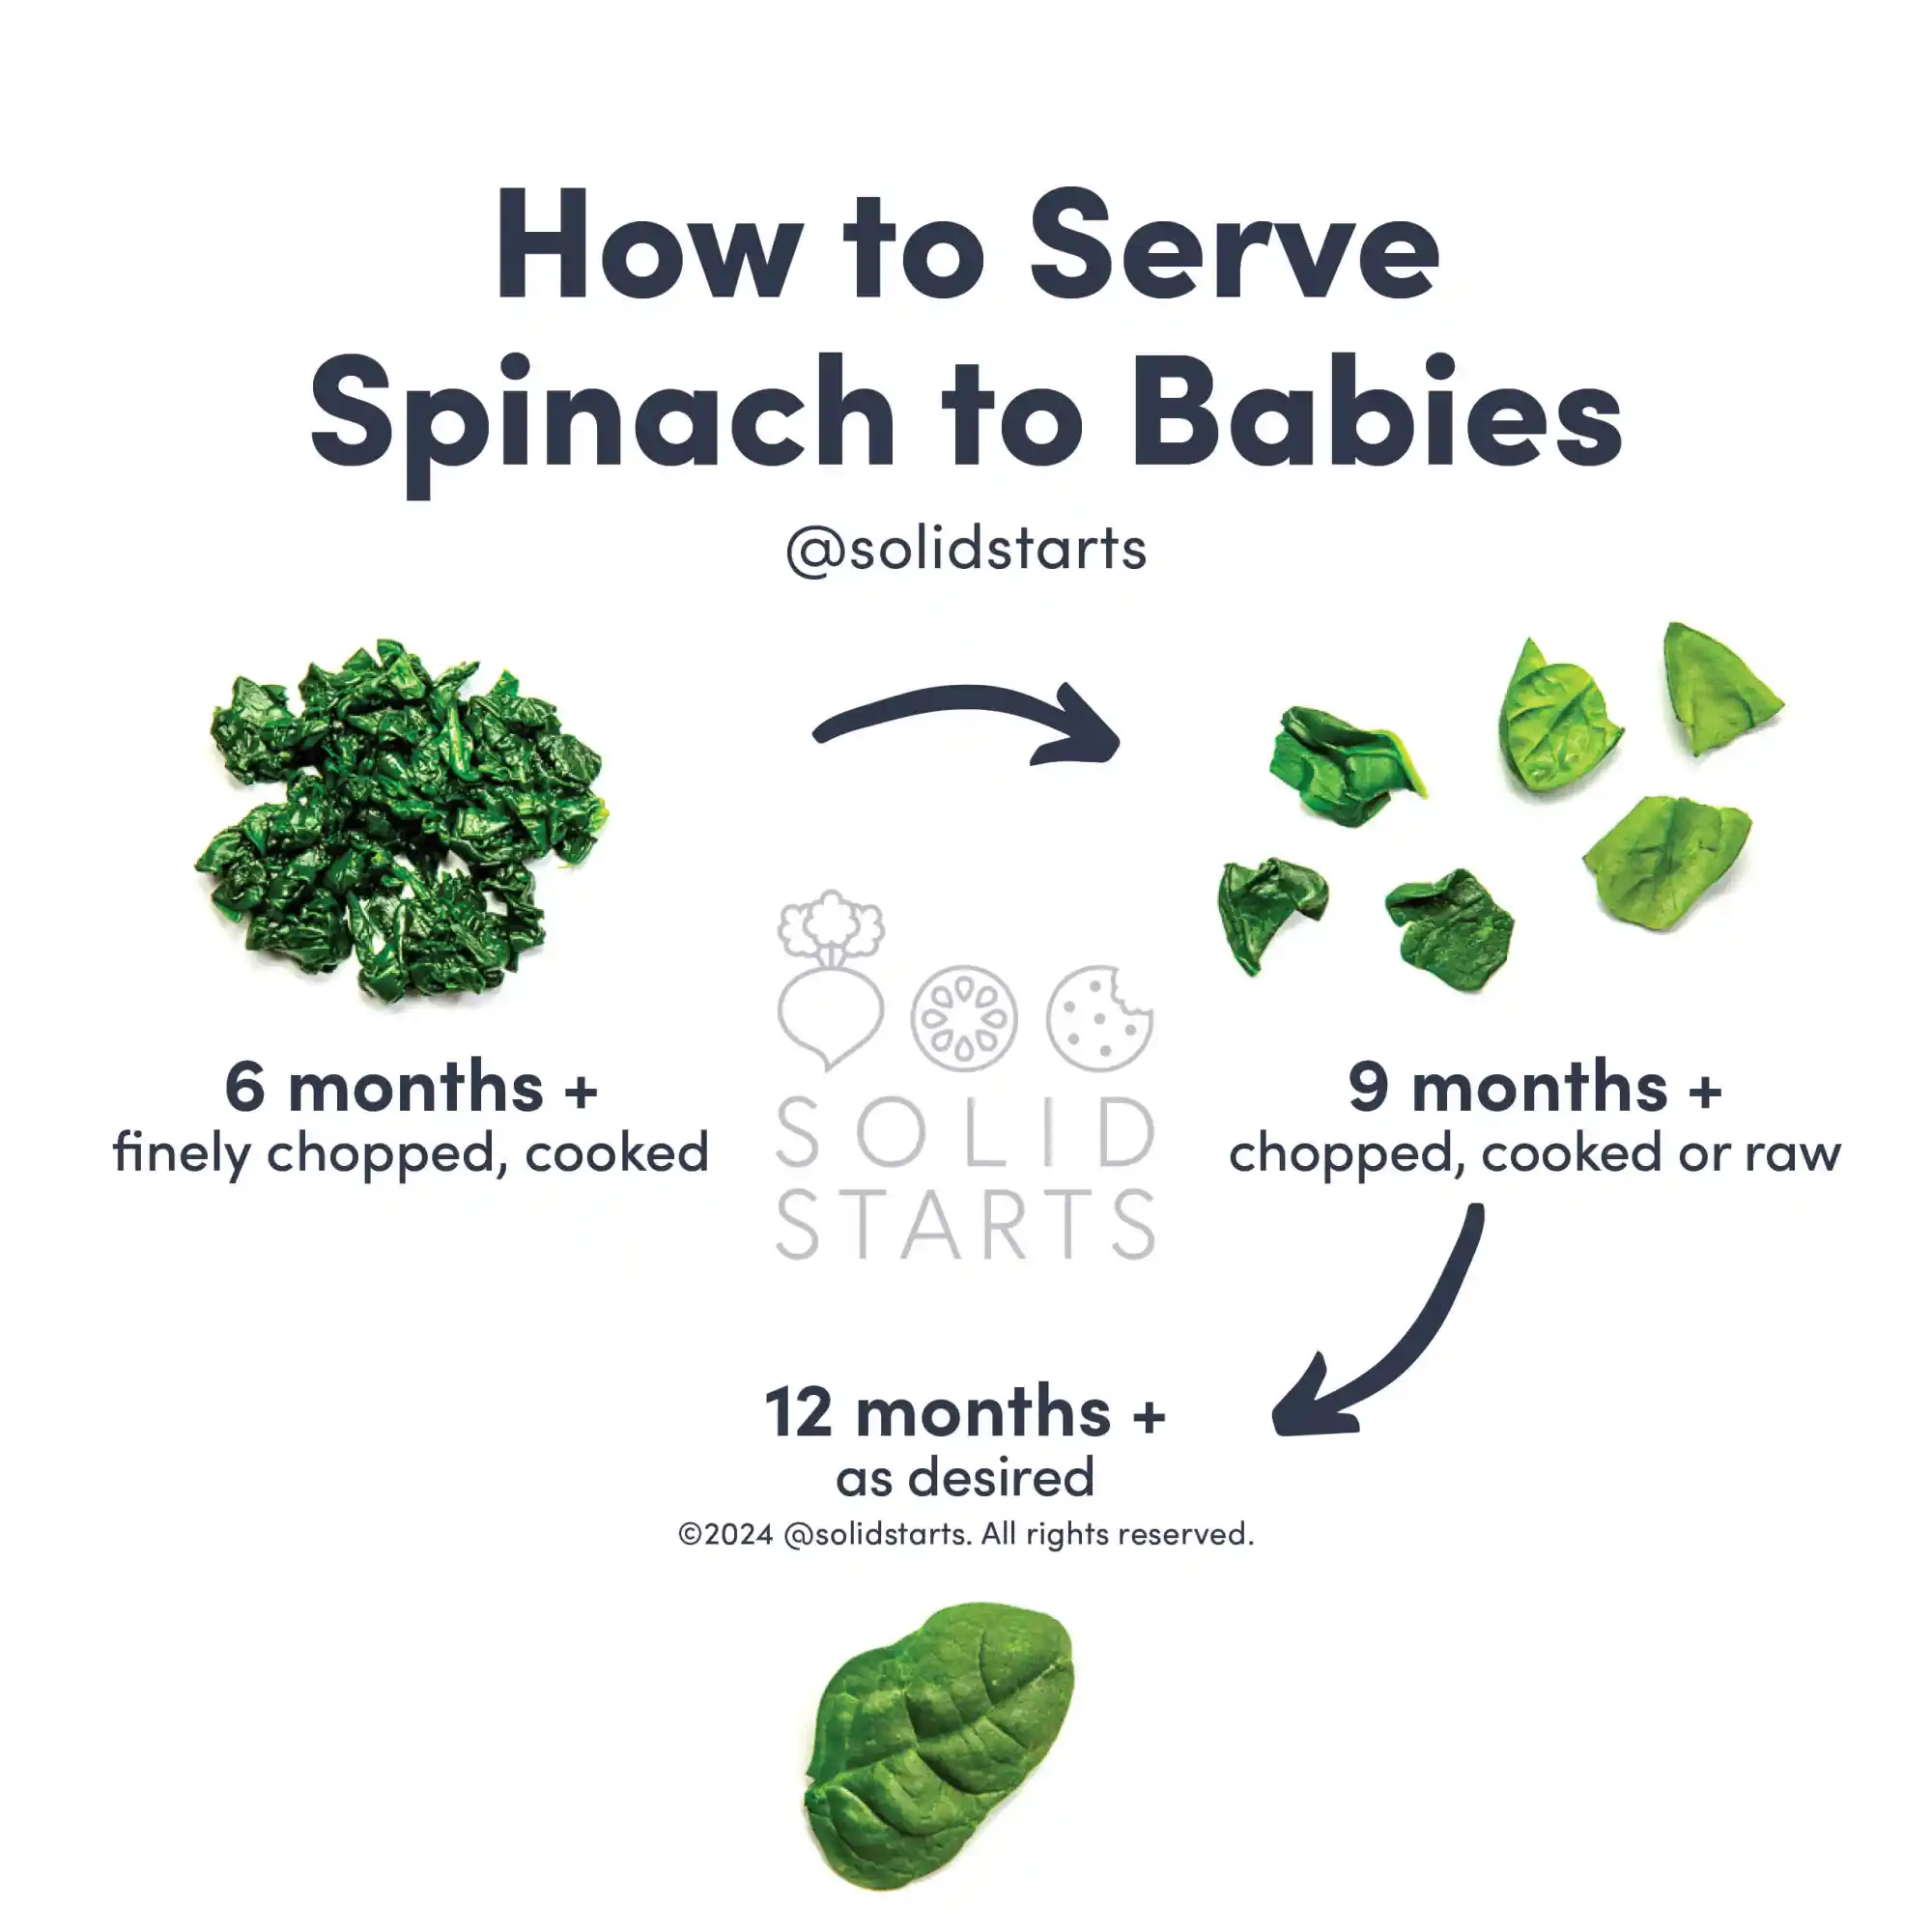 a Solid Starts infographic with the header How to Serve Spinach to Babies: finely chopped and cooked for 6 mos+, chopped, cooked or raw, for 9 mos+, and as desired for 12 months +